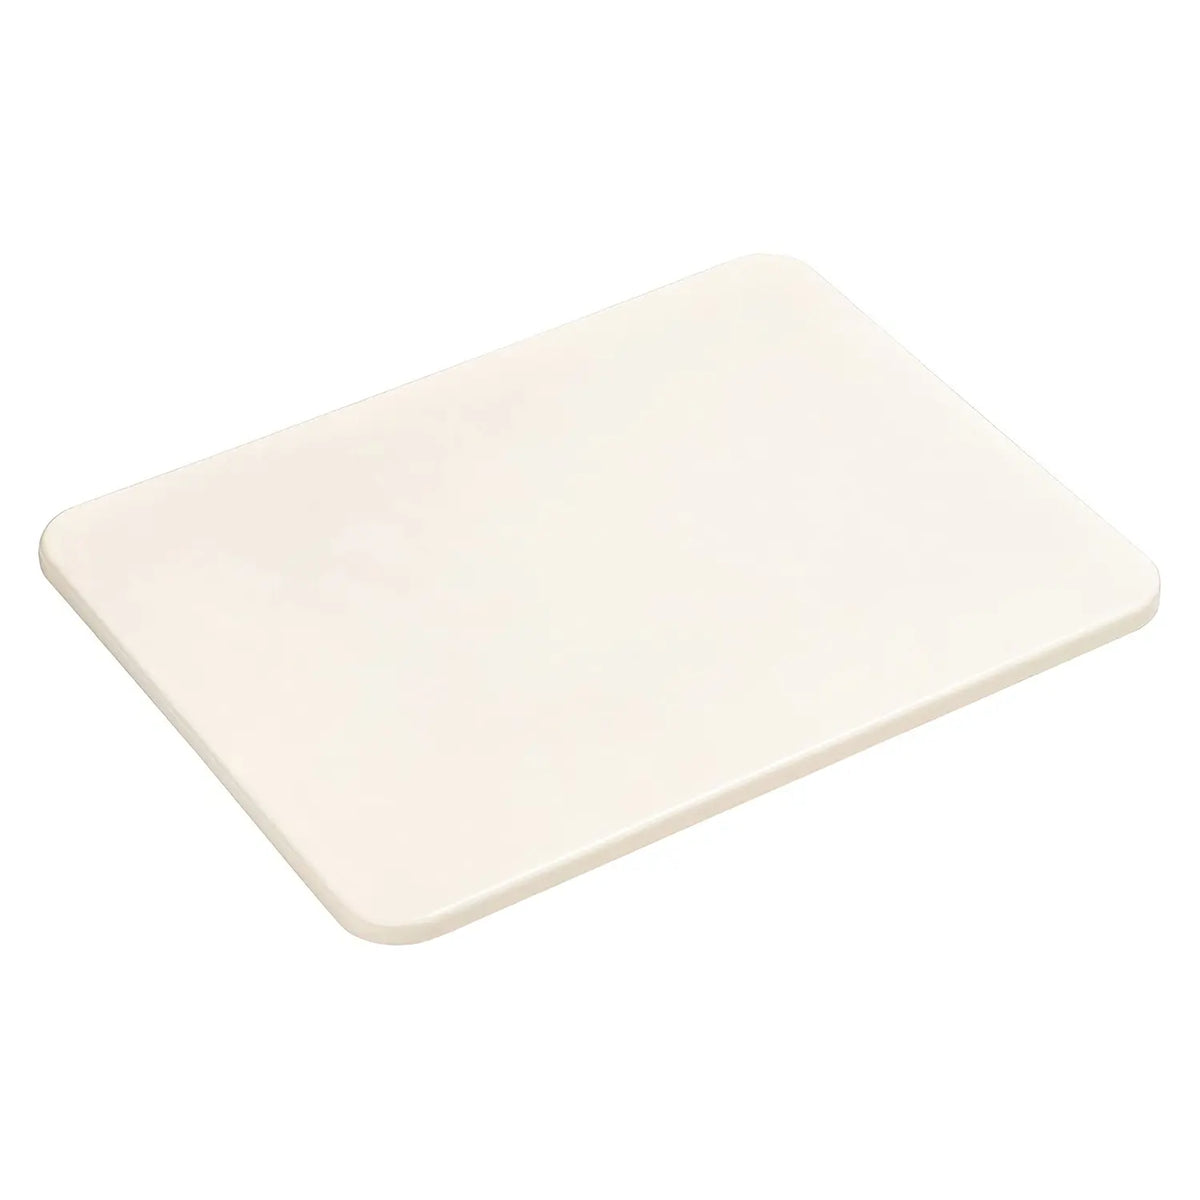 BENKEI Polycarbonate Stackable Tray